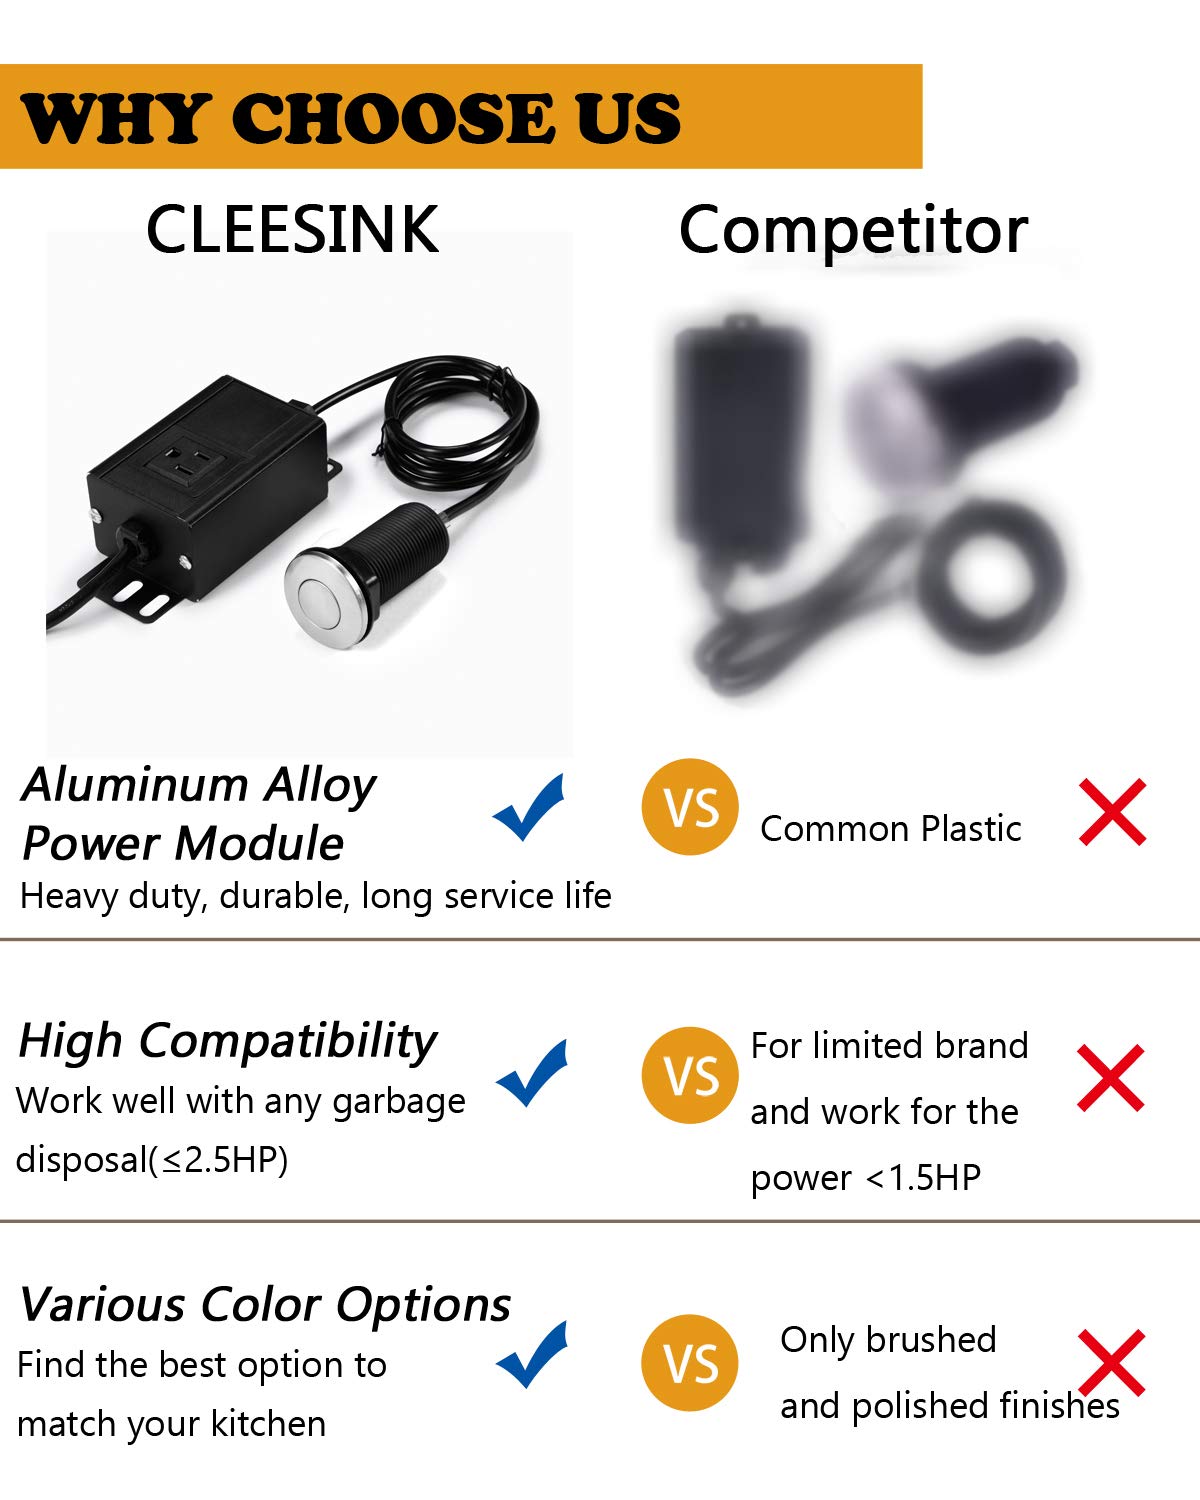 Garbage Disposal Air Switch Kit, Sink Top Waste Disposer On/Off Switch with Aluminum Alloy Power Module (LONG BRUSHED NICKEL STAINLESS STEEL BUTTON) by CLEESINK